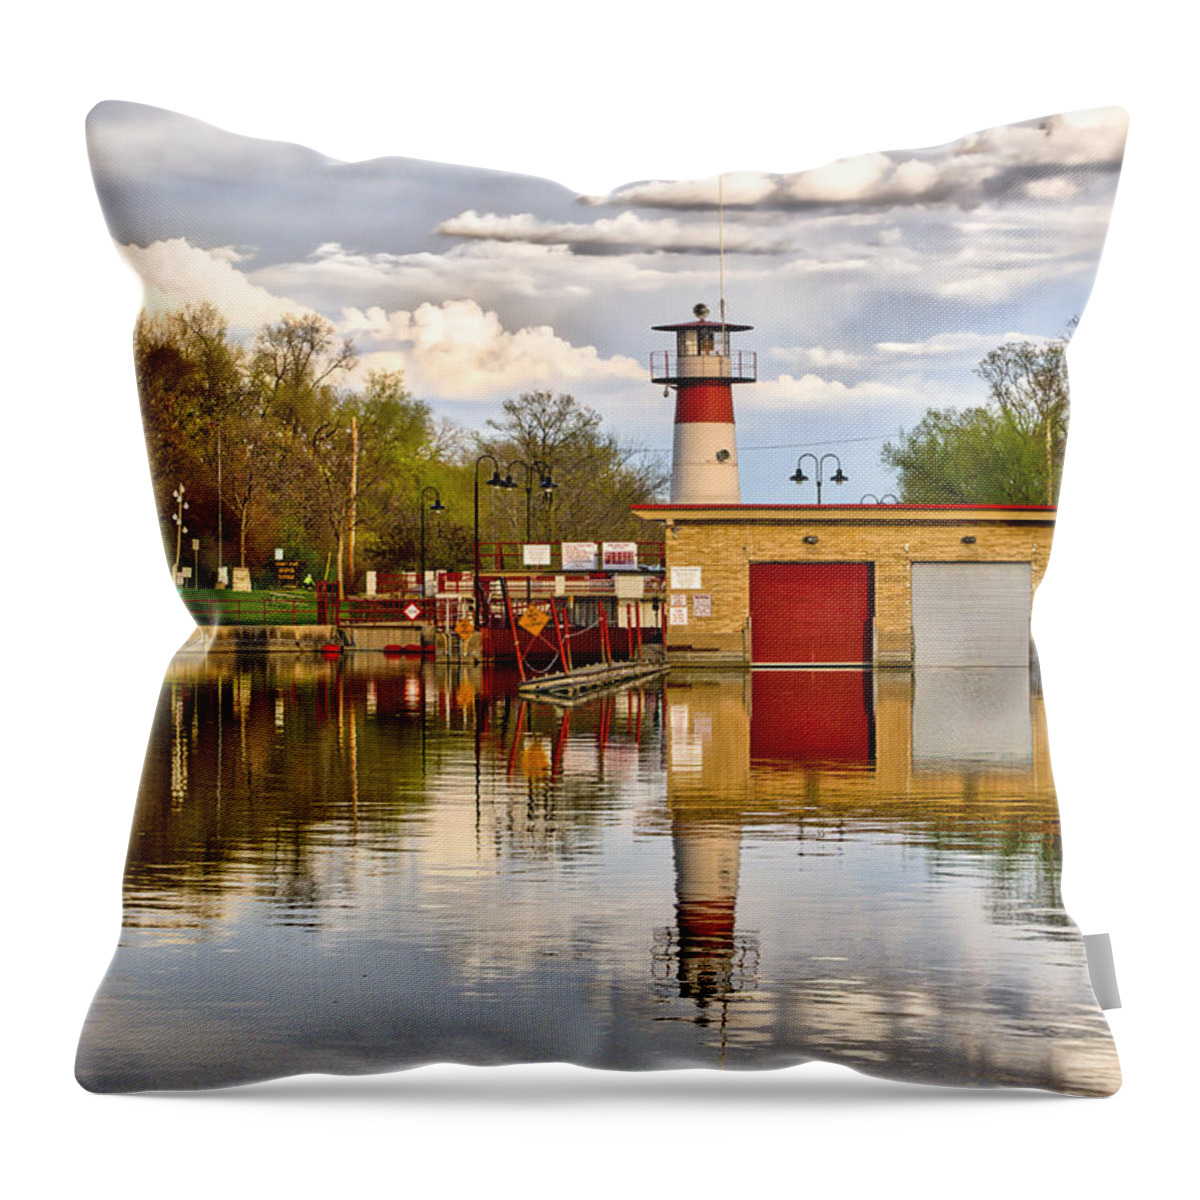 Tenney Throw Pillow featuring the photograph Tenney Lock - Madison - Wisconsin by Steven Ralser